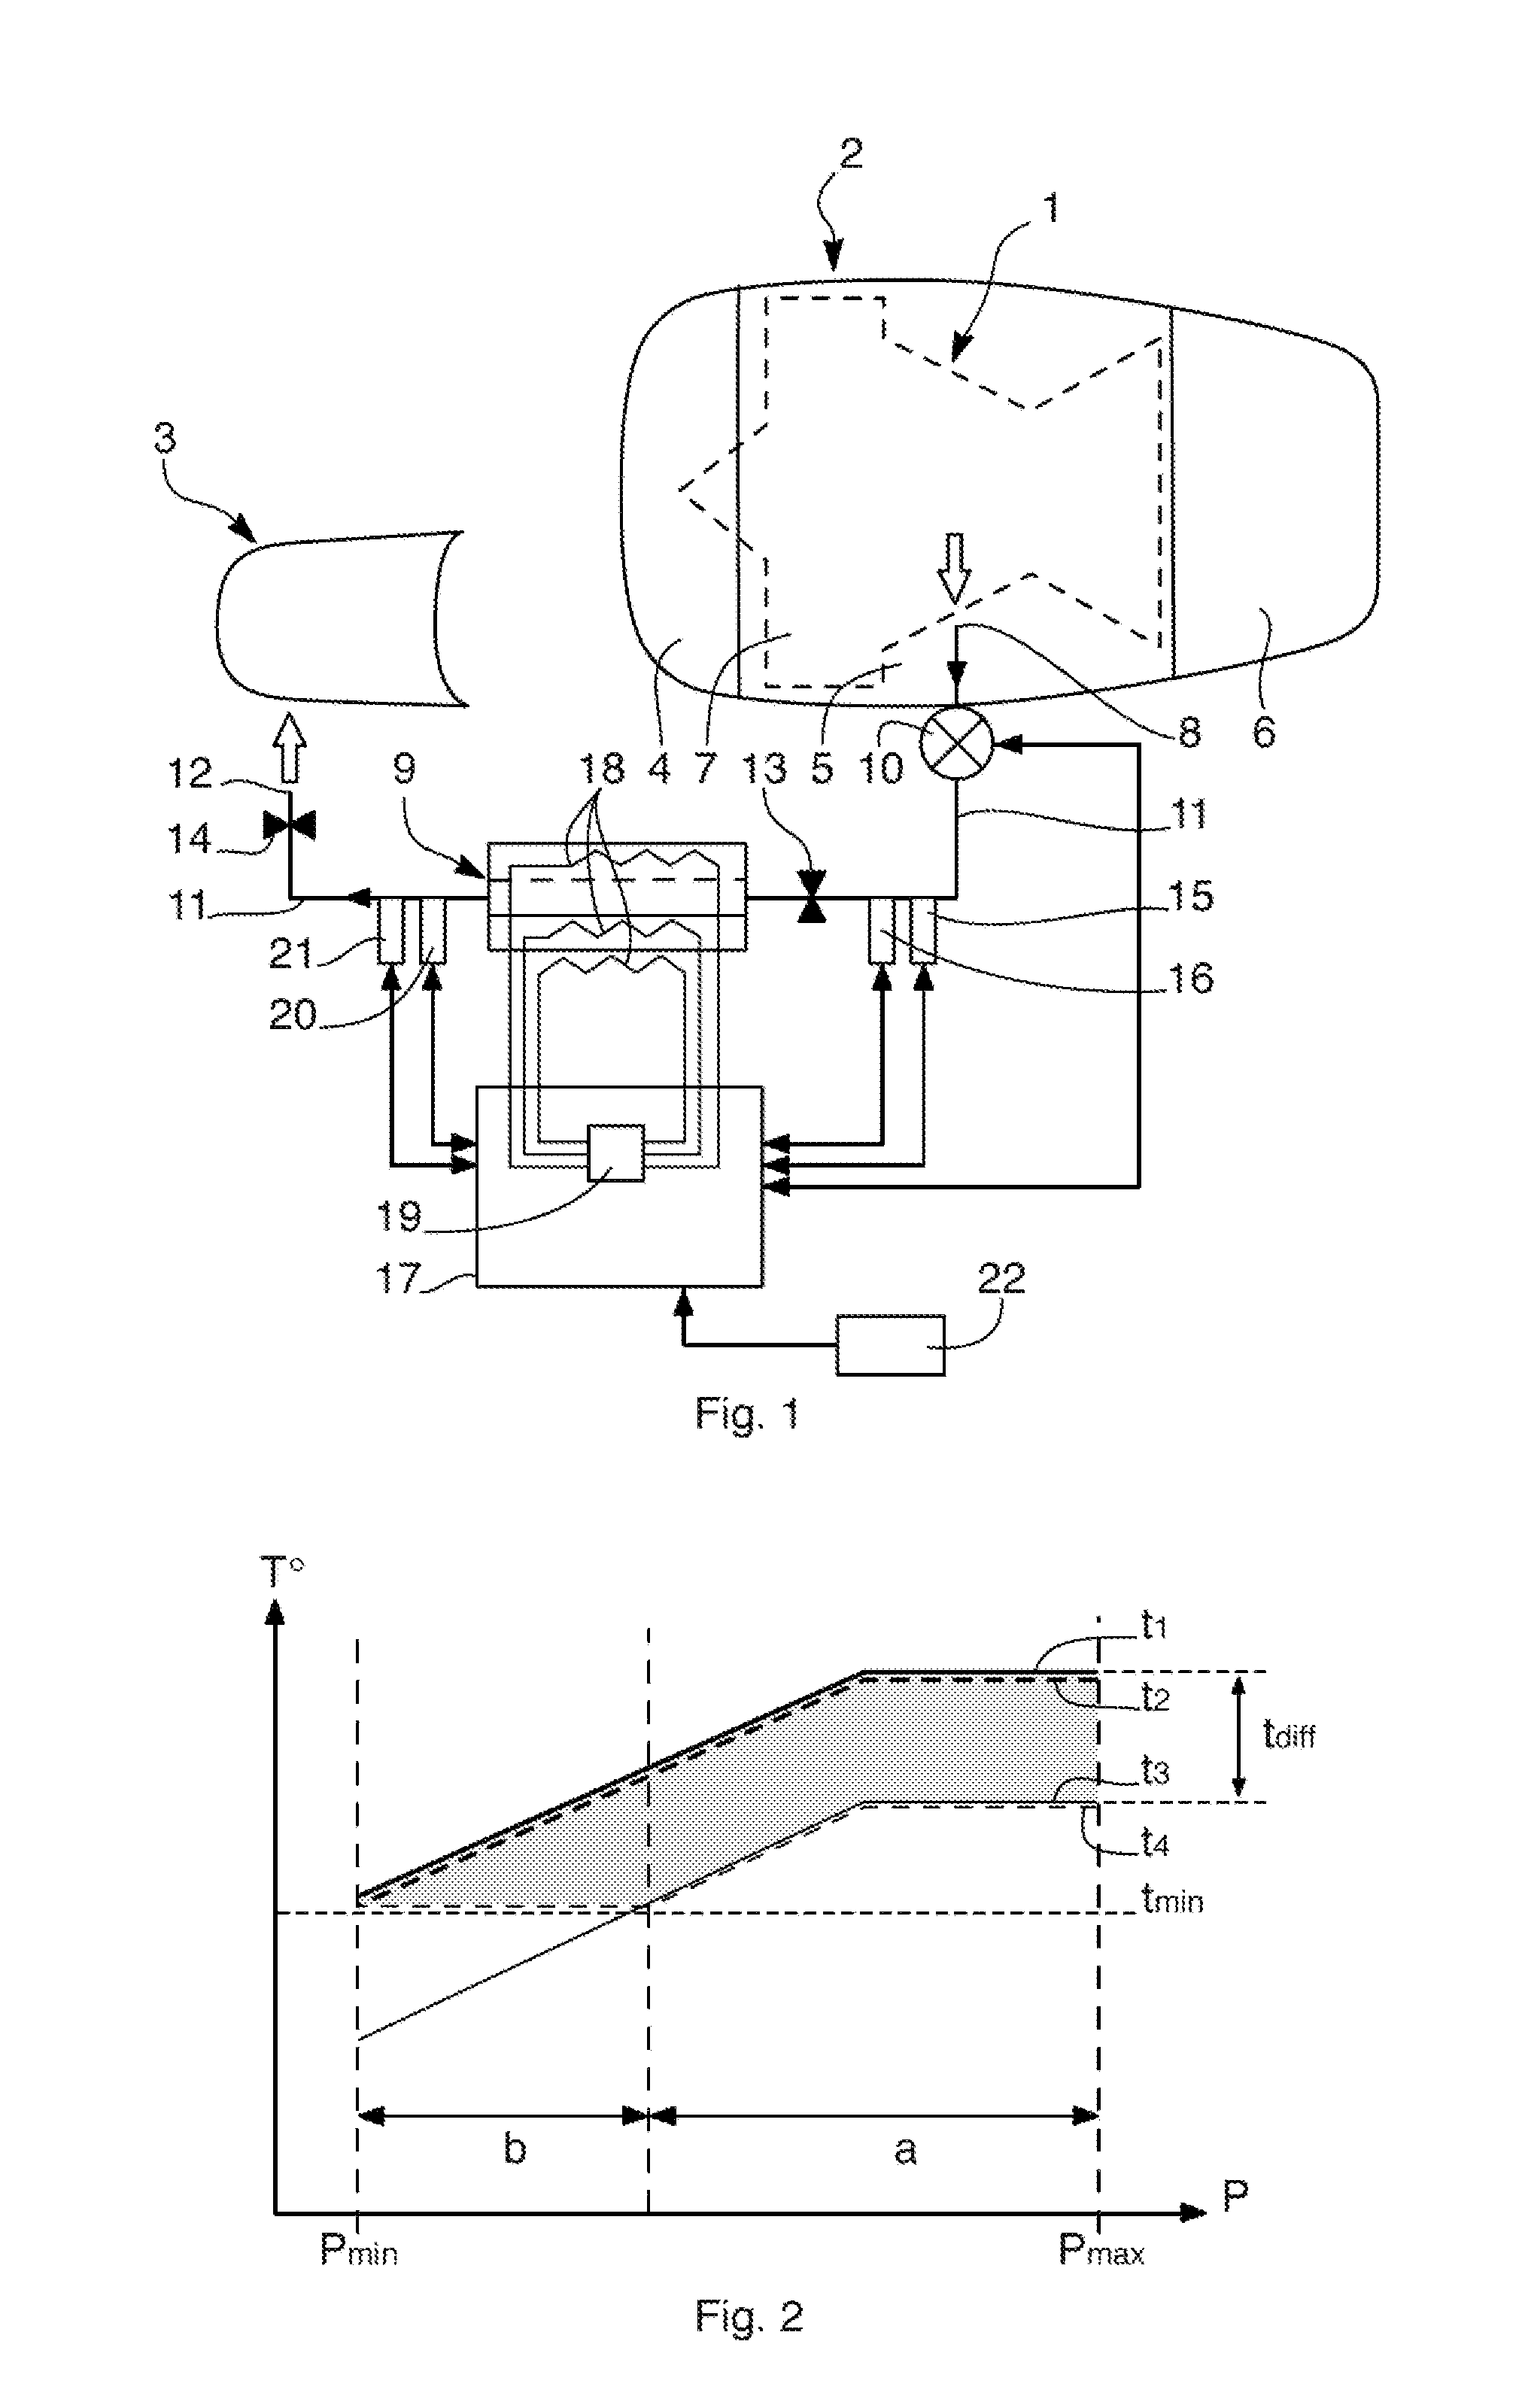 Method And Device For Using Hot Air To De-Ice The Leading Edges Of A Jet Aircraft